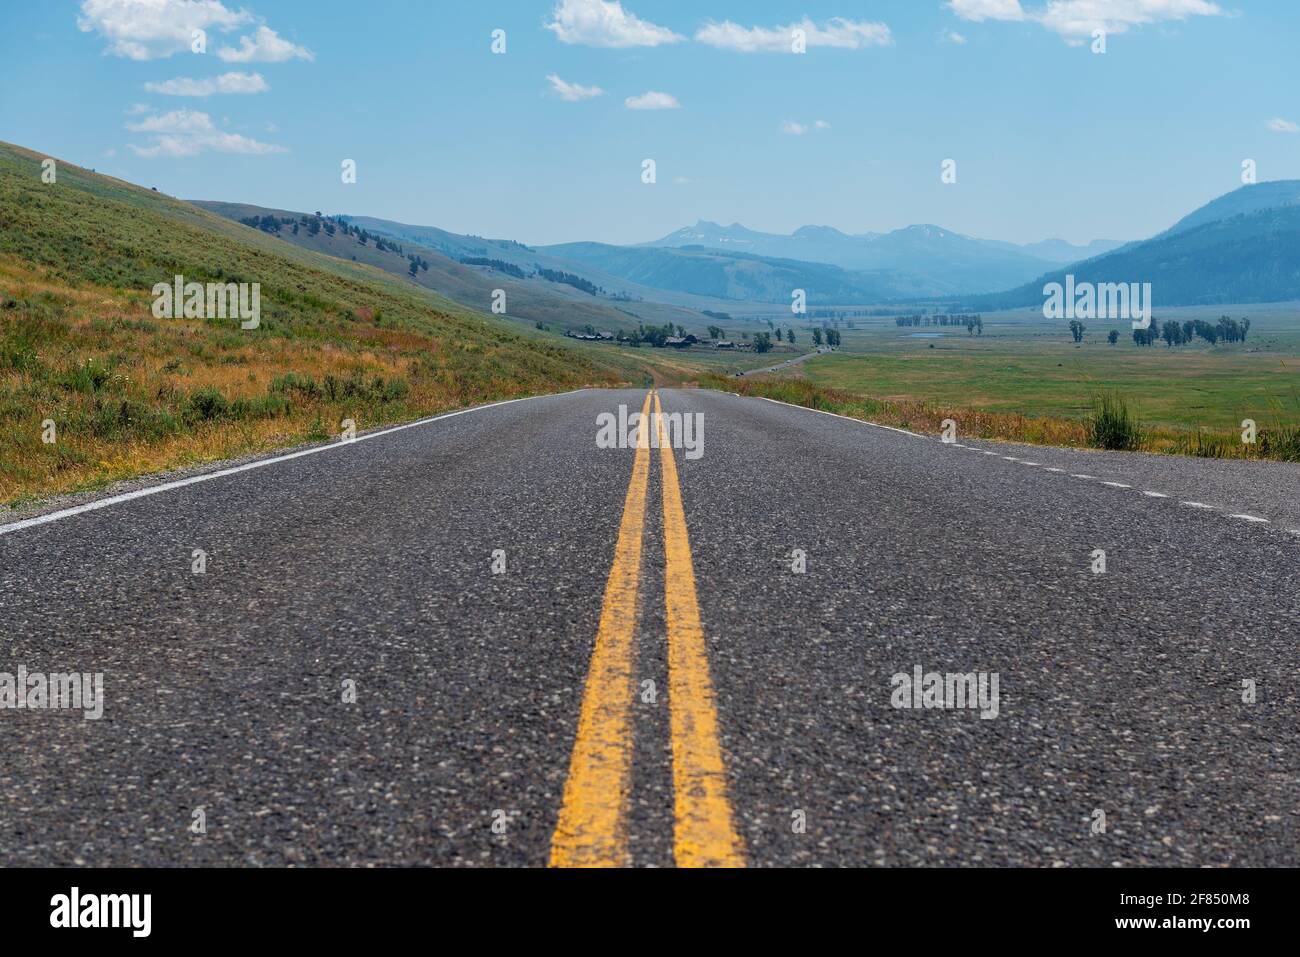 On the road, Yellowstone national park, Wyoming, United States of America (USA). Stock Photo